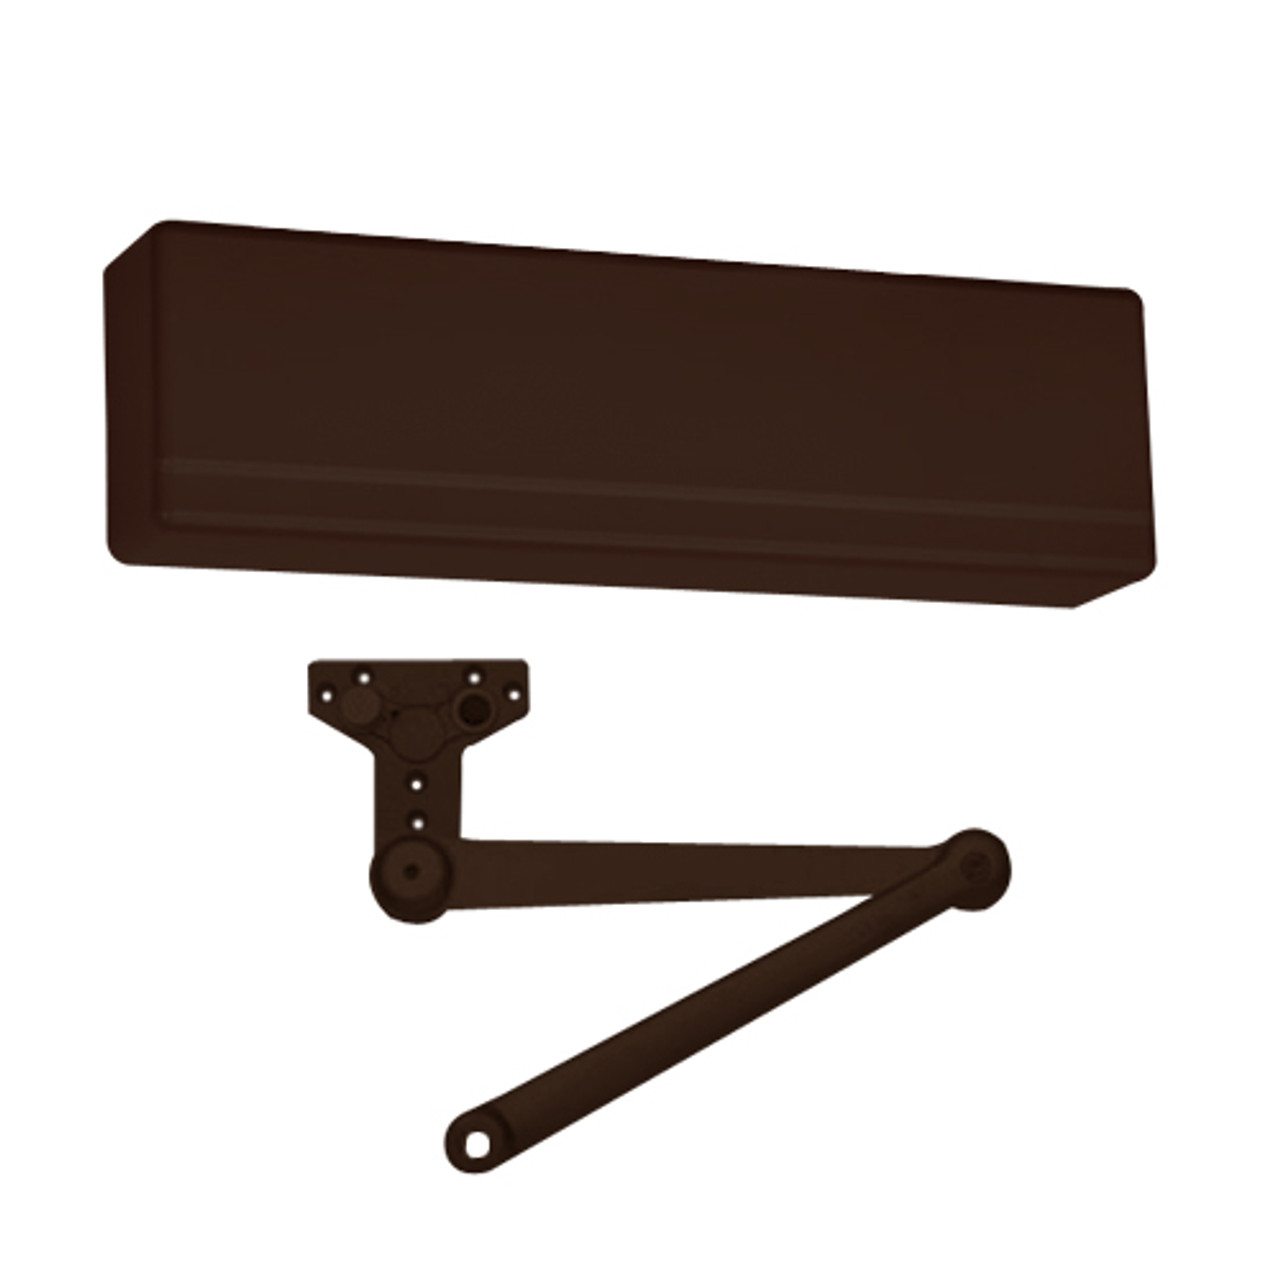 351-PS-10BE Sargent 351 Series Powerglide Door Closer with Heavy Duty Parallel Arm with Positive Stop in Dark Oxidized Satin Bronze